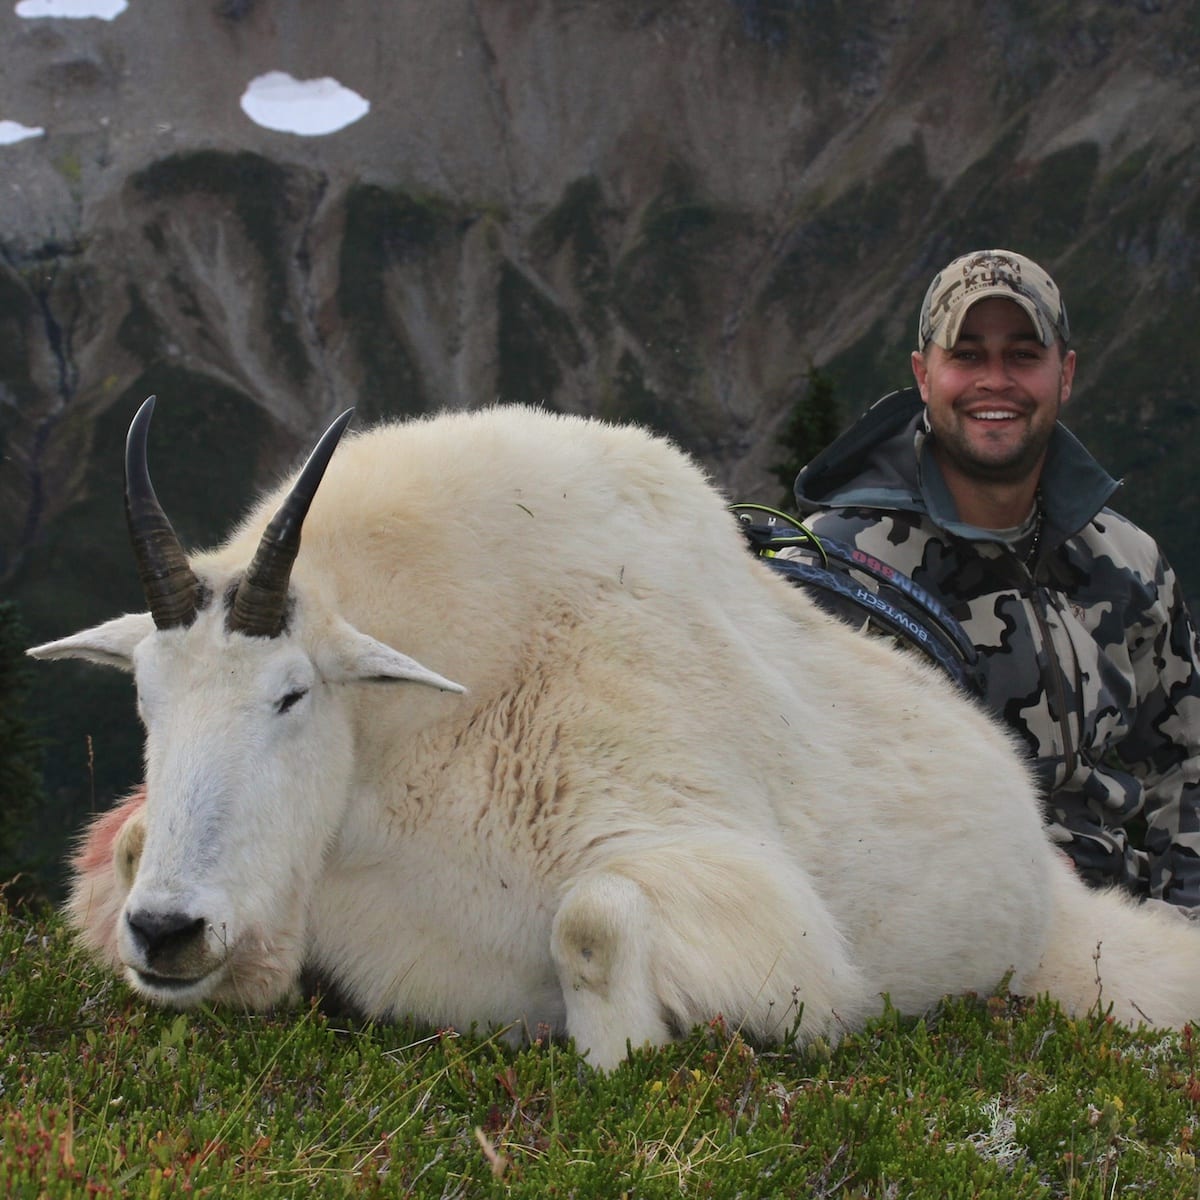  What an awesome archery goat. Look at the bases on that thing!